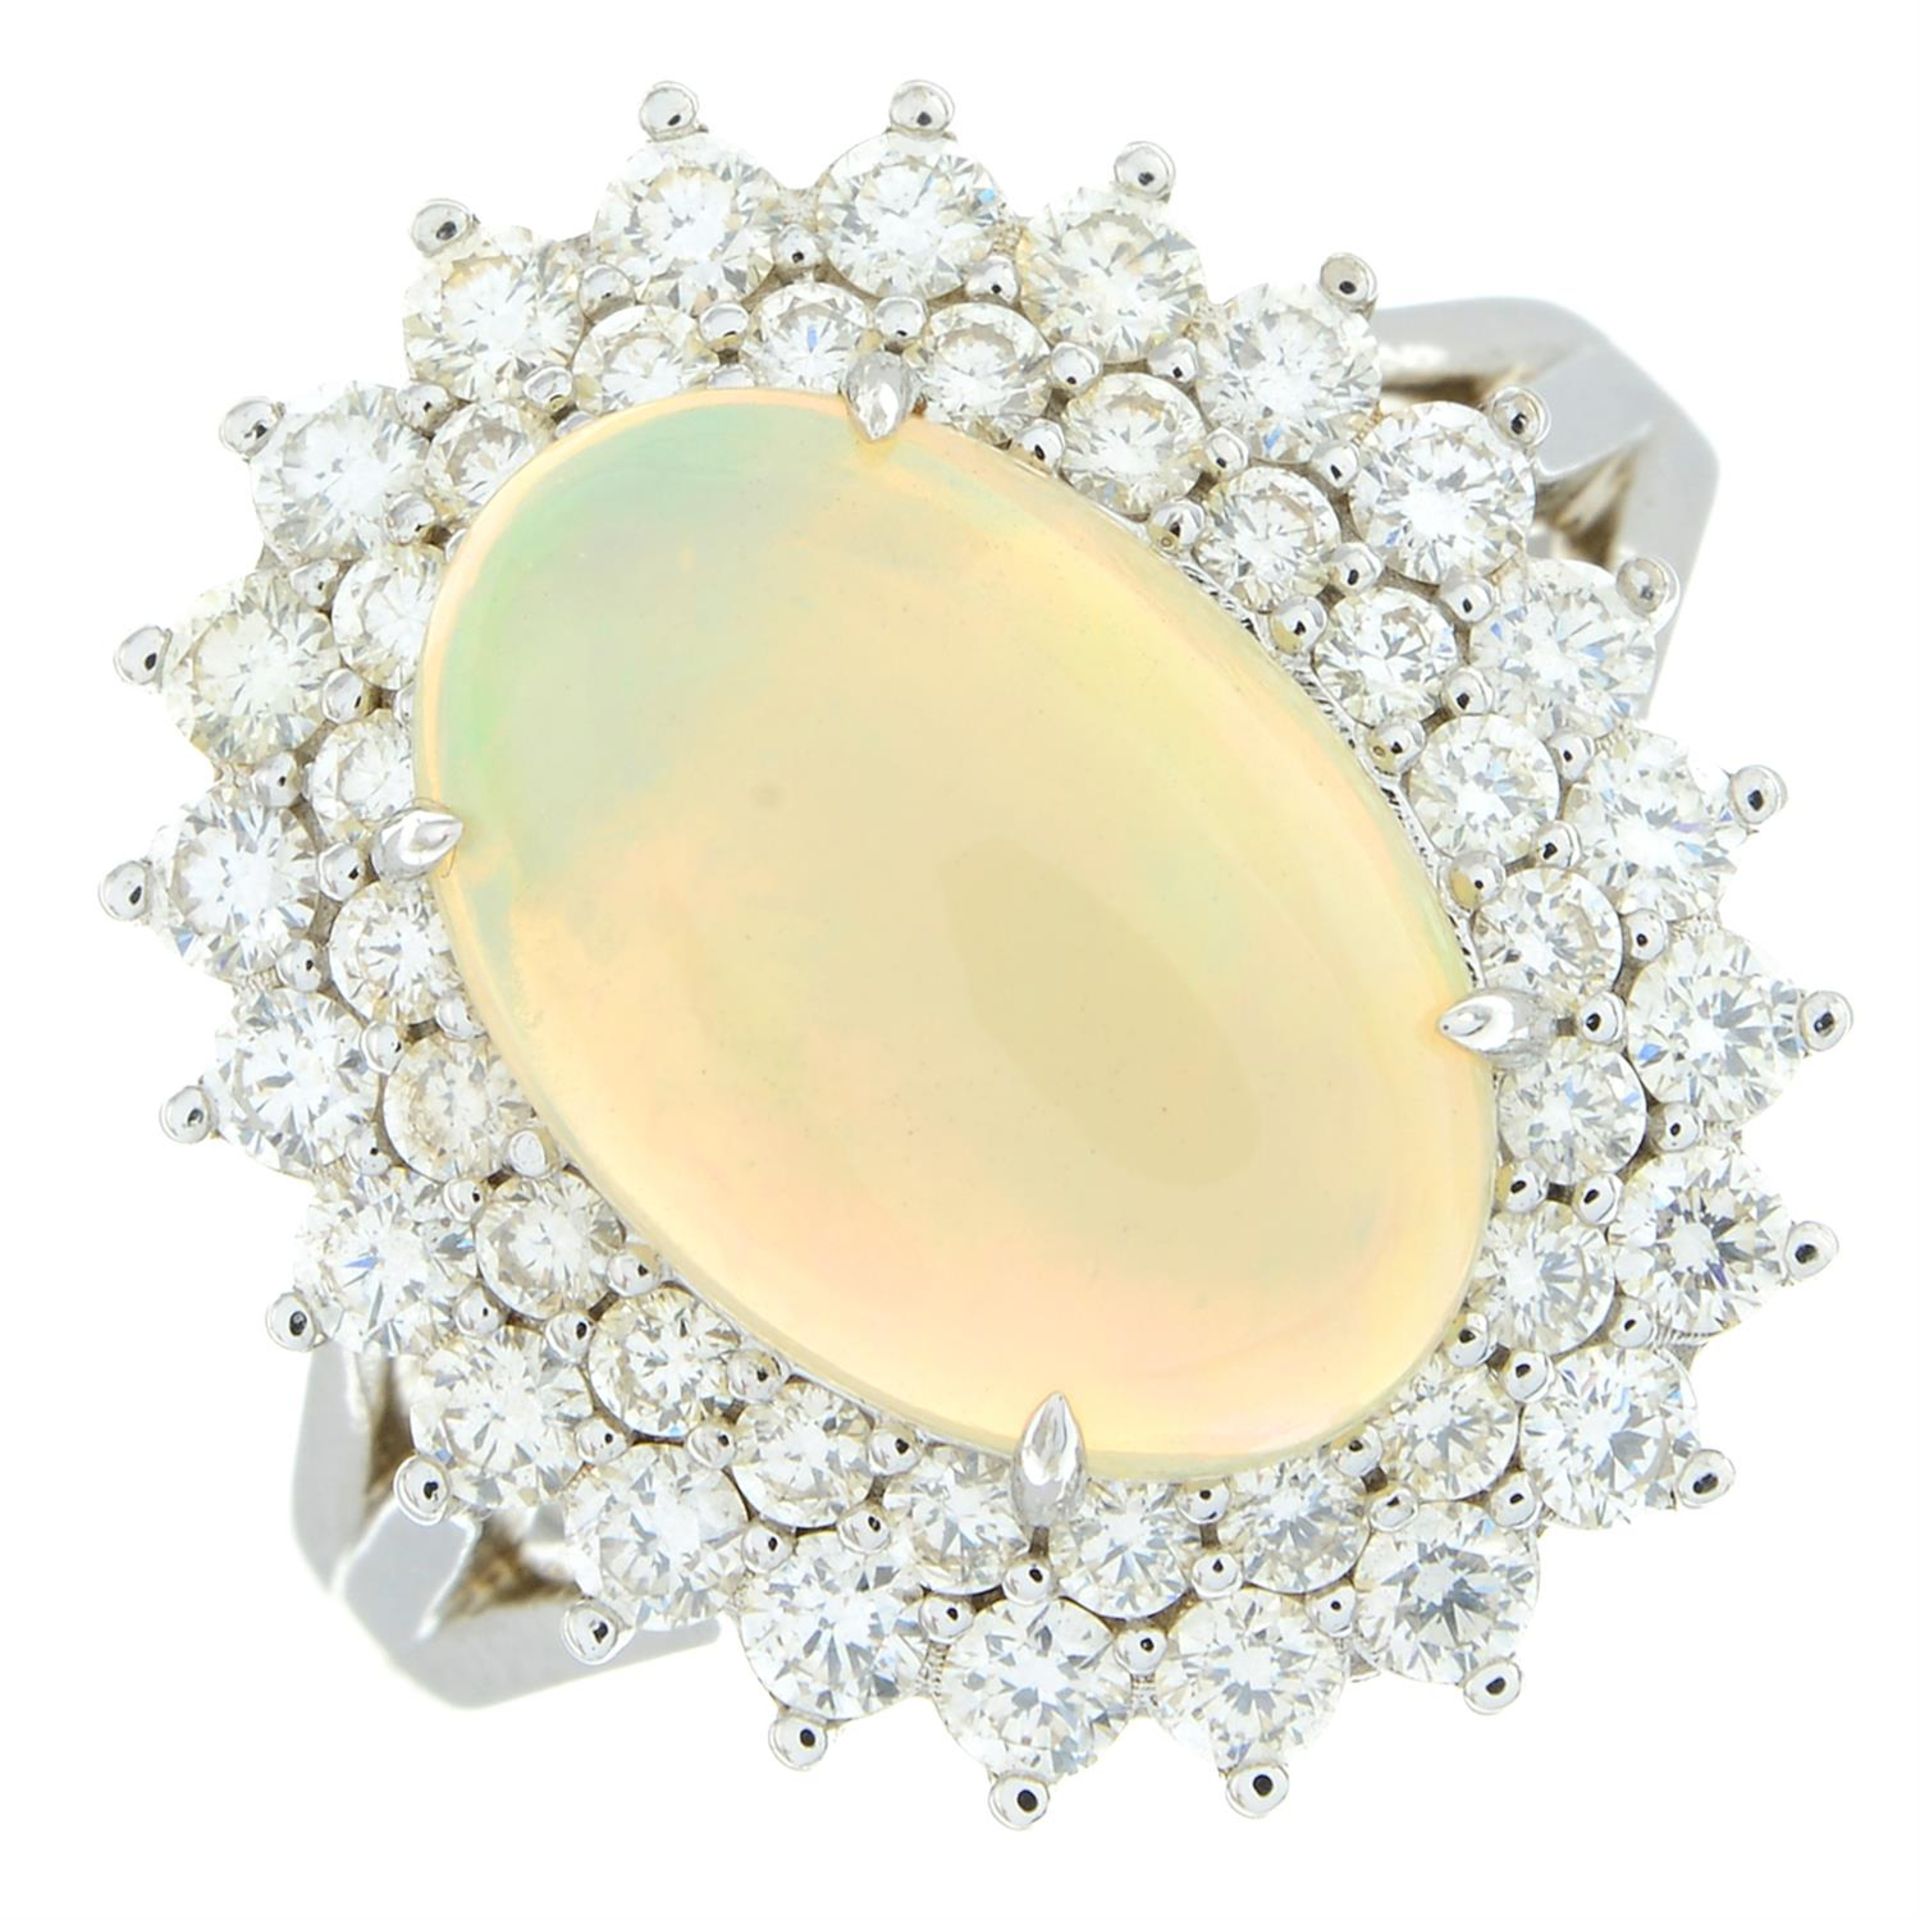 Opal and diamond ring - Image 2 of 5